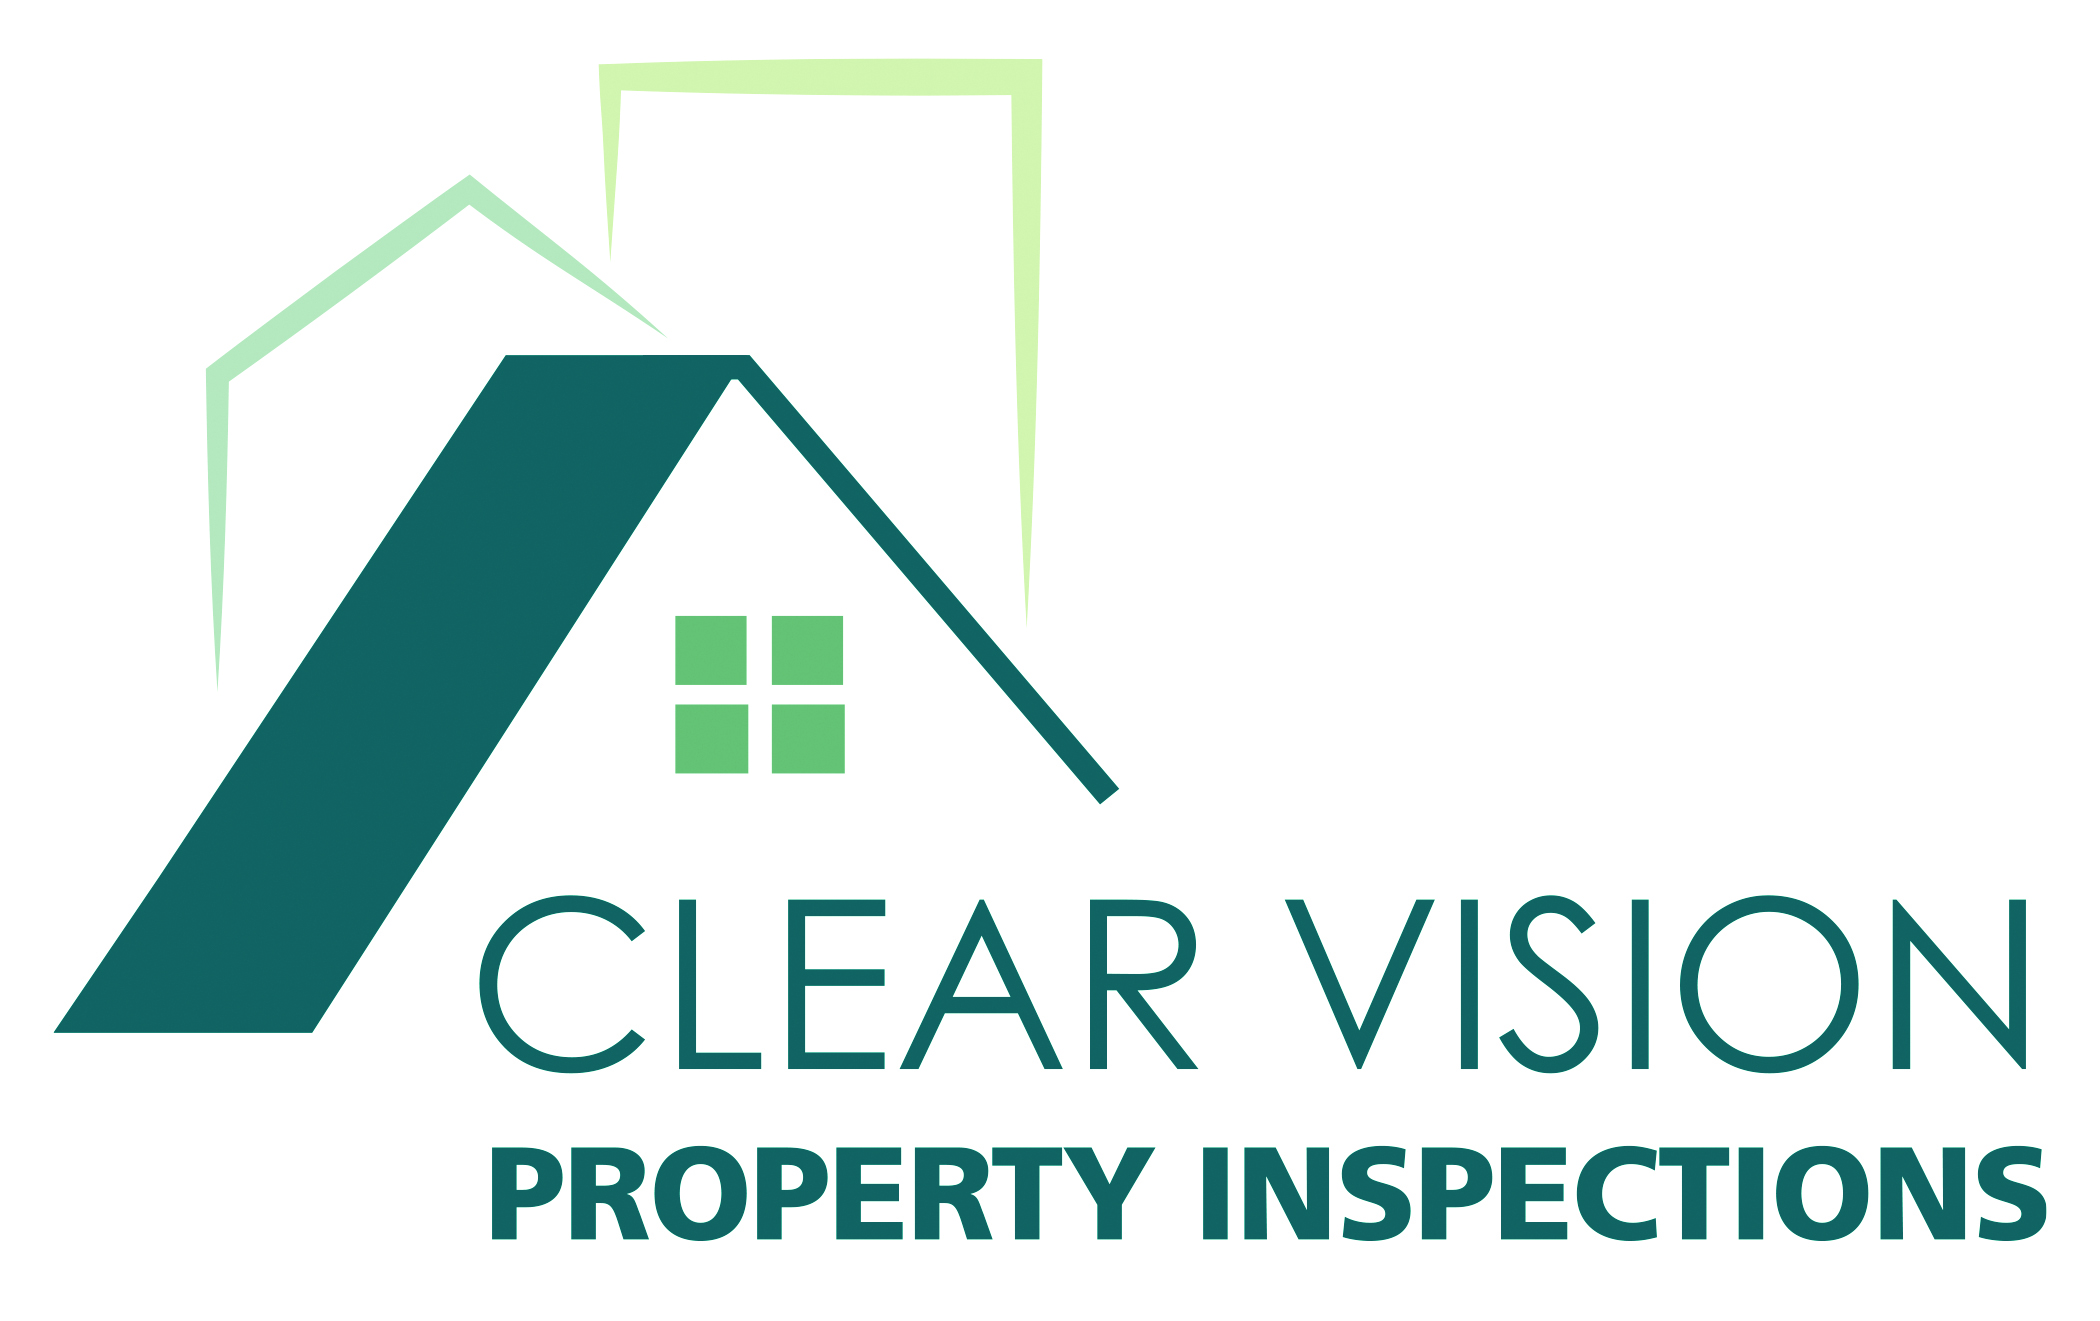 Clear Vision Property Inspections Is An Affiliate Of Guernsey-Muskingum Valley Association of Realtors<sup>®</sup>